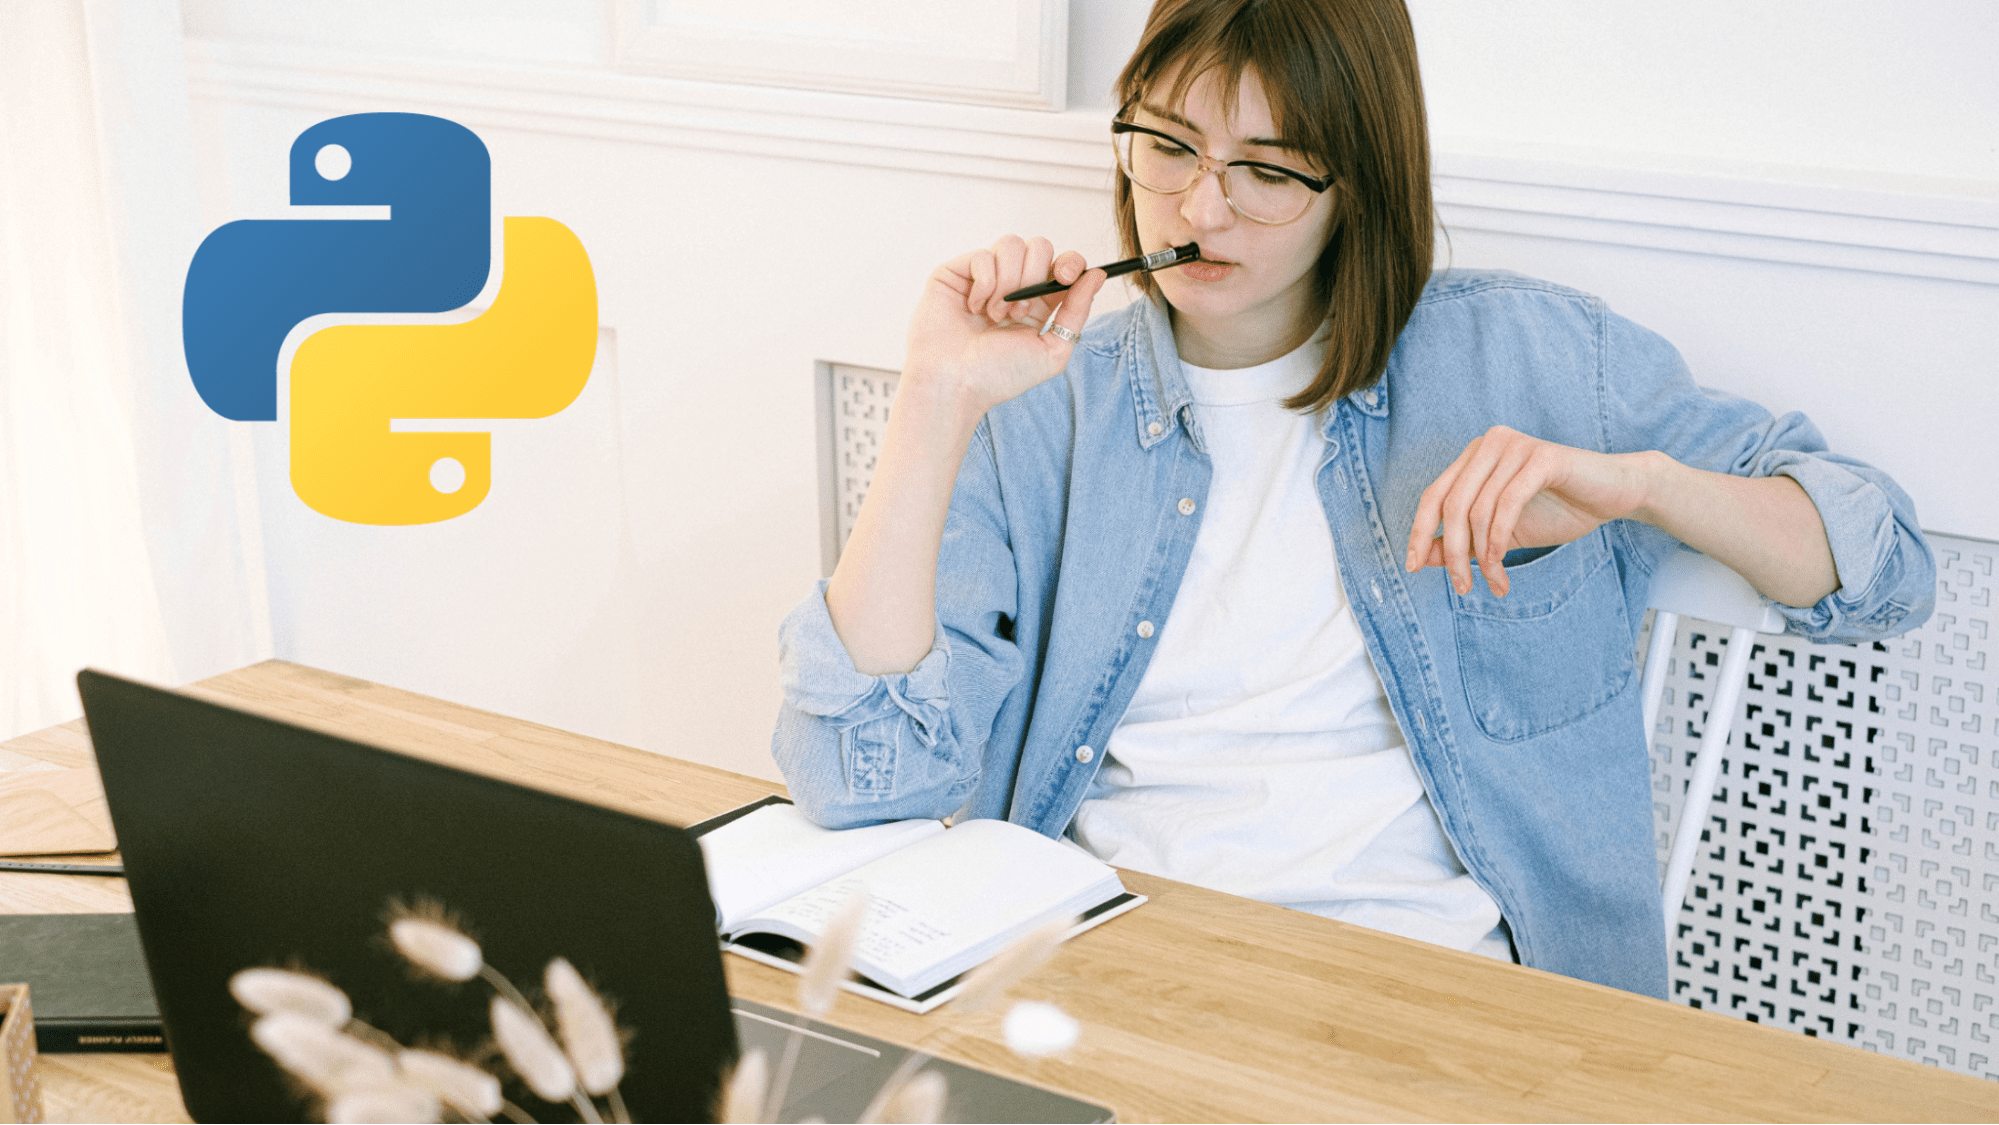 5 Free University Courses to Learn Python